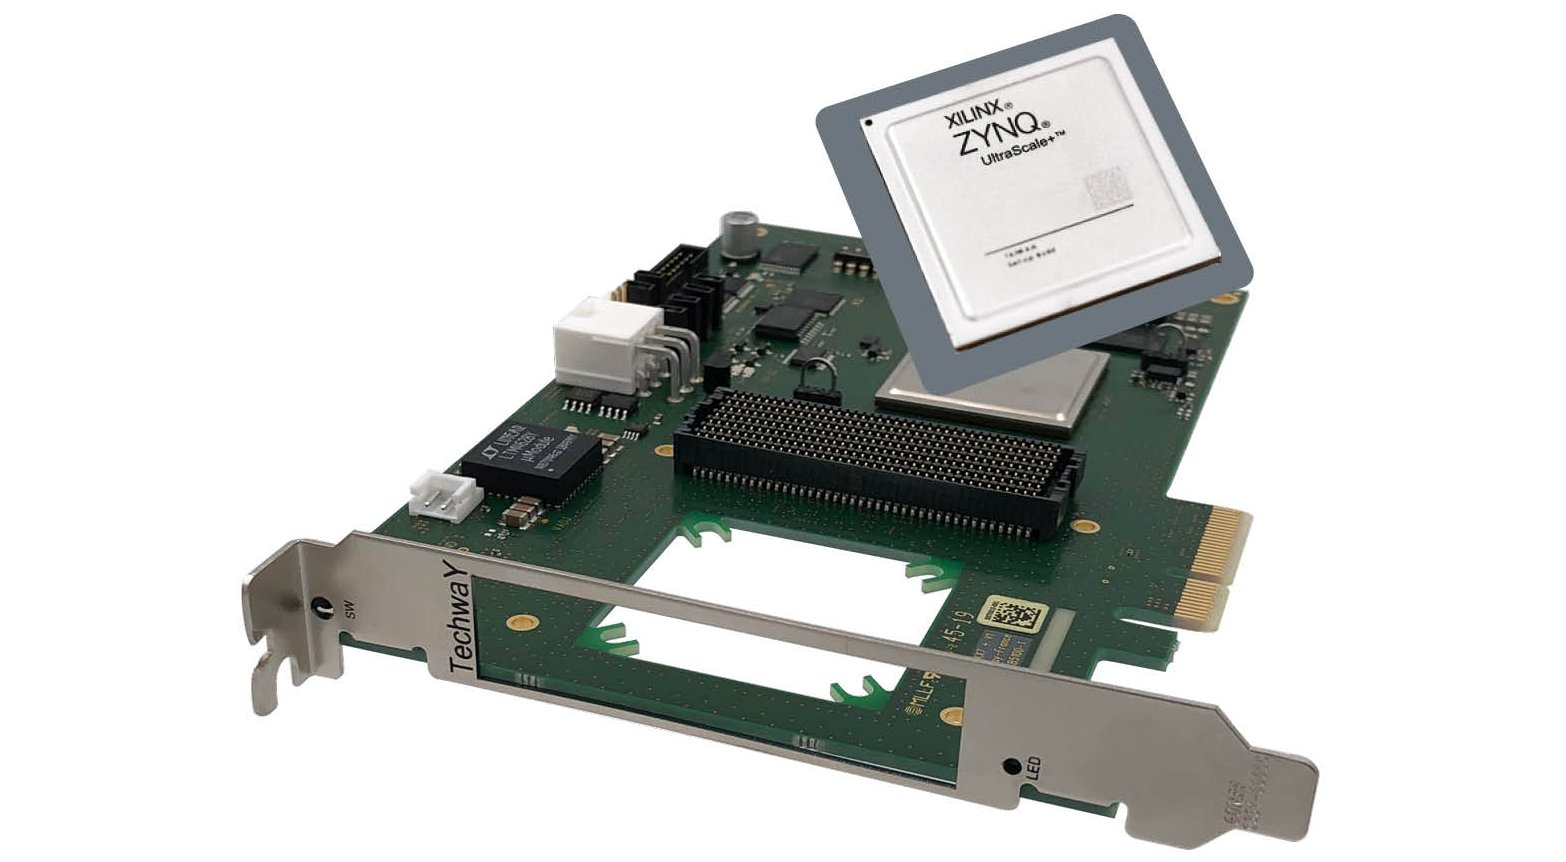 Zynq UltraScale+ SoC PCIe platform with FMC+ site